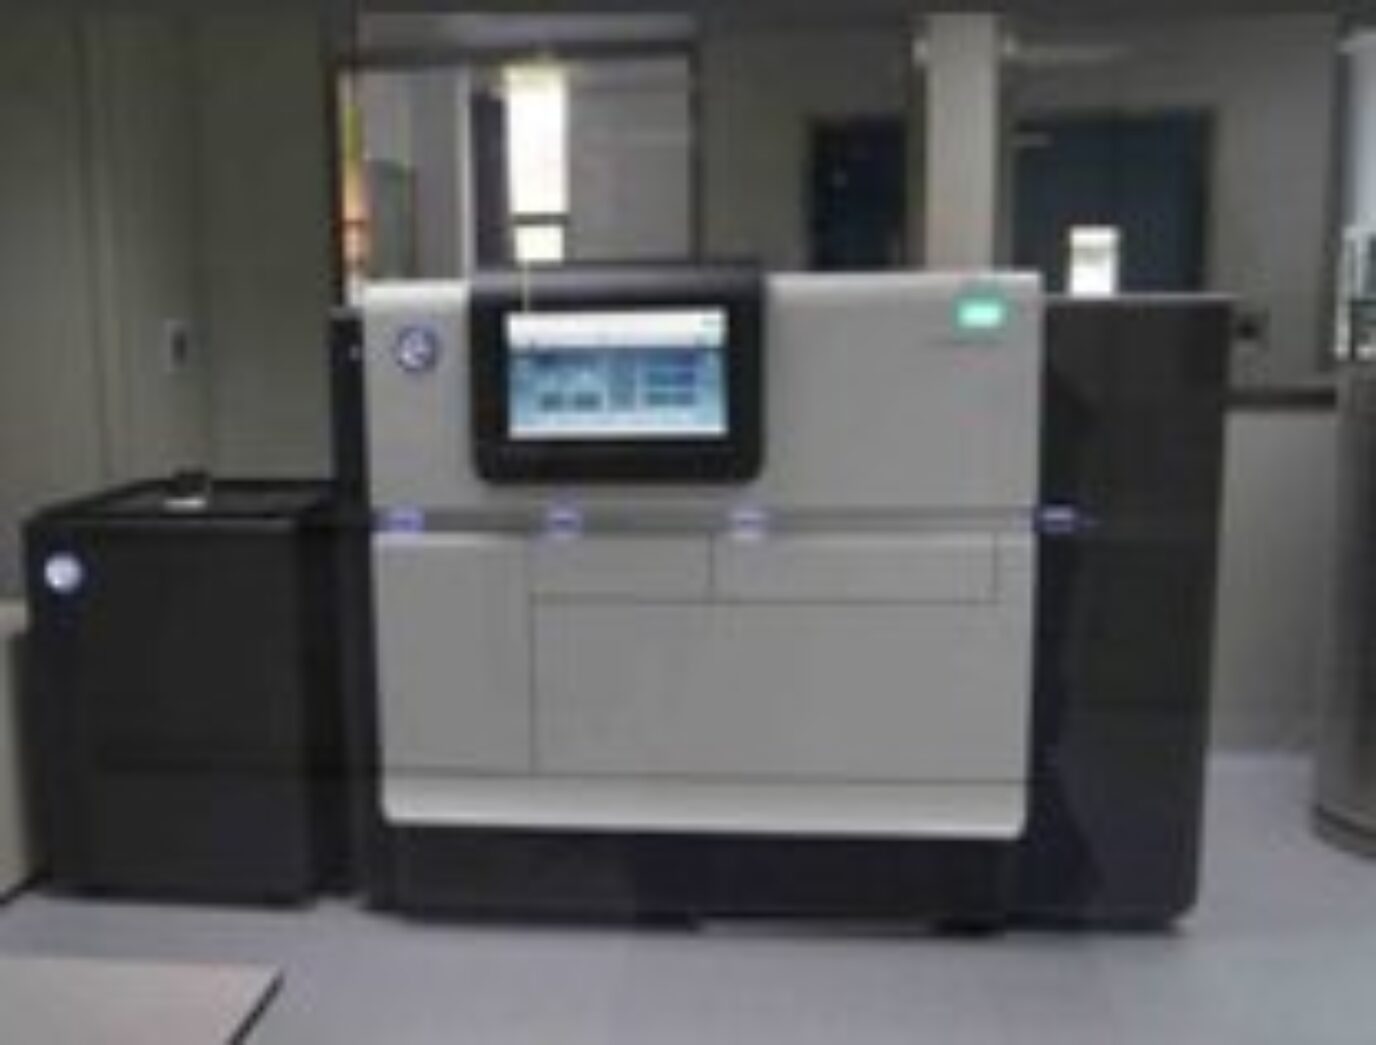 Third generation DNA sequencing equipment